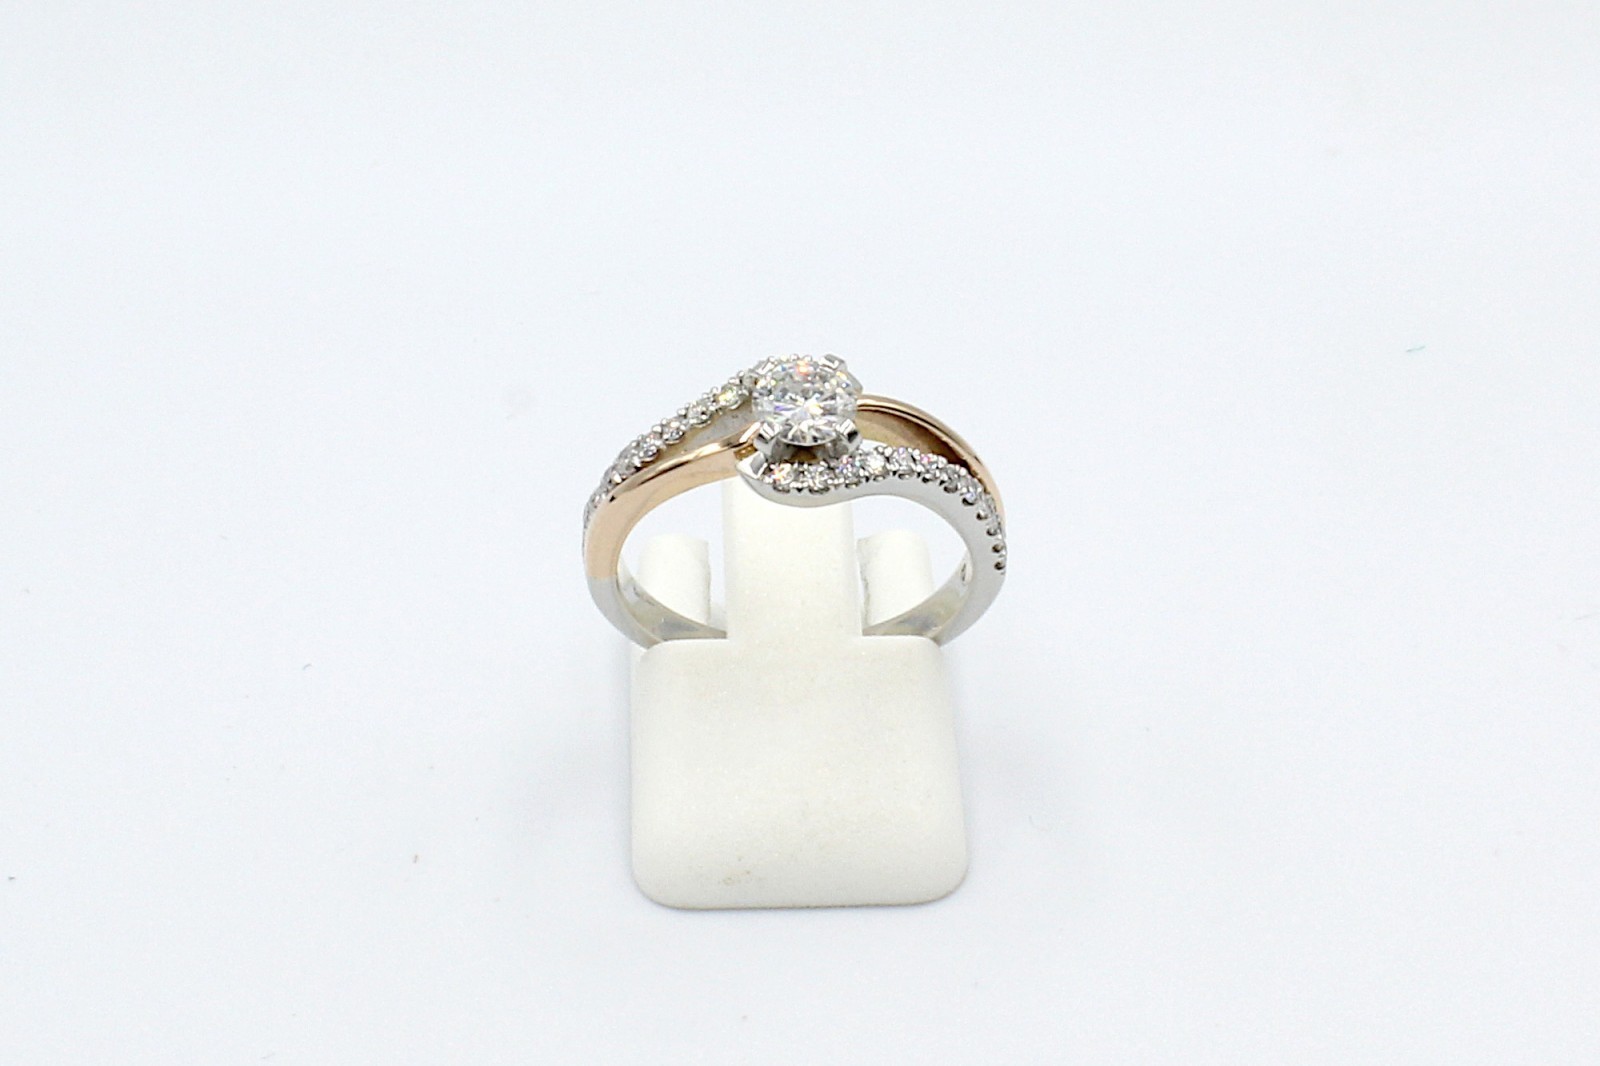 fron tview of a repaired engagement ring on a white background